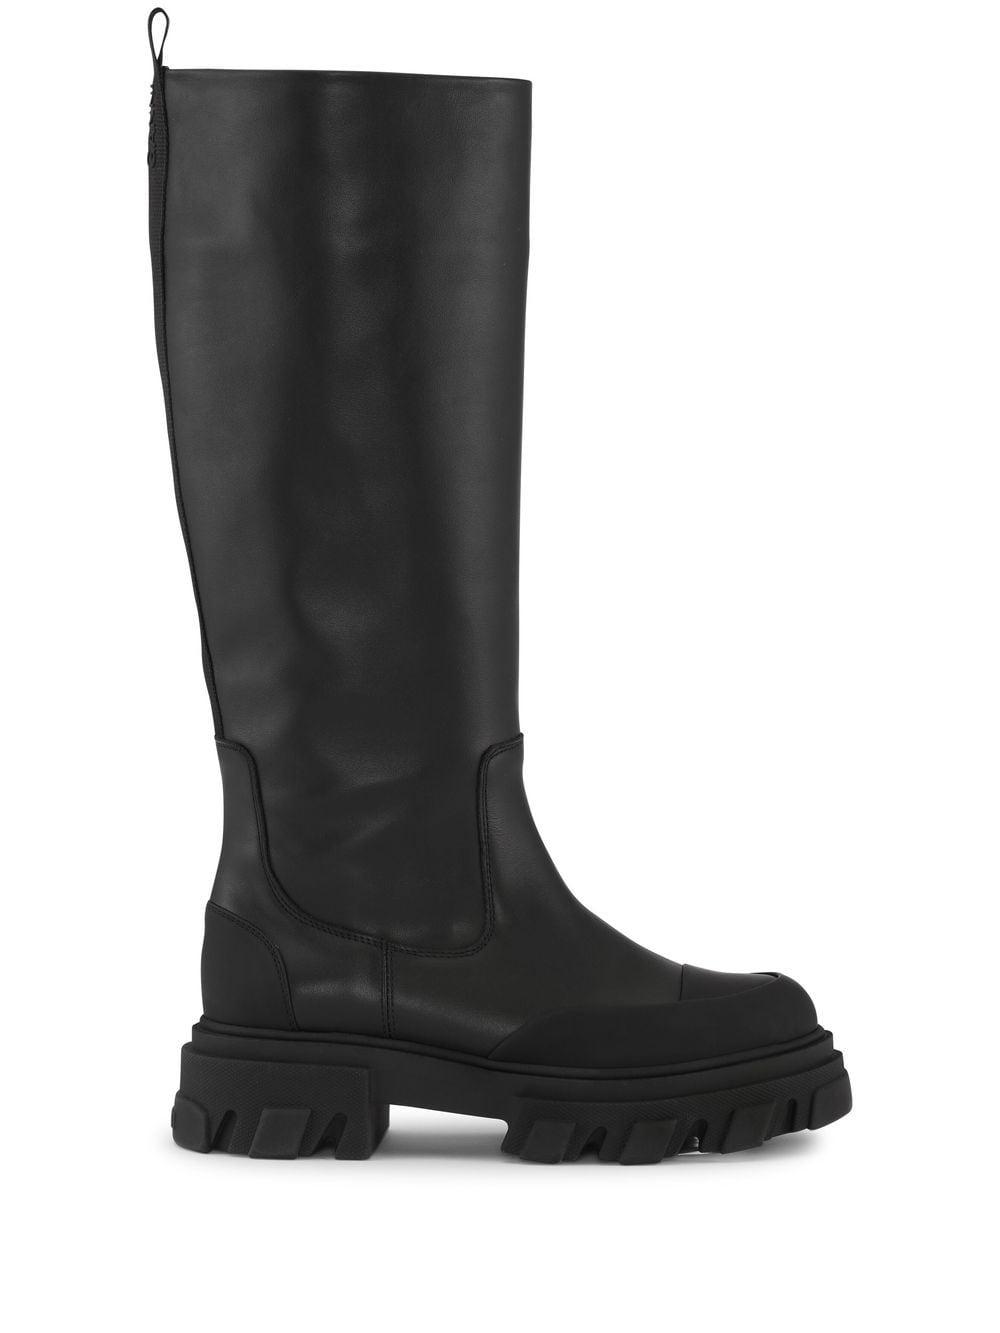 Ganni Leather Cleated Tubular Knee Boots in Black | Lyst